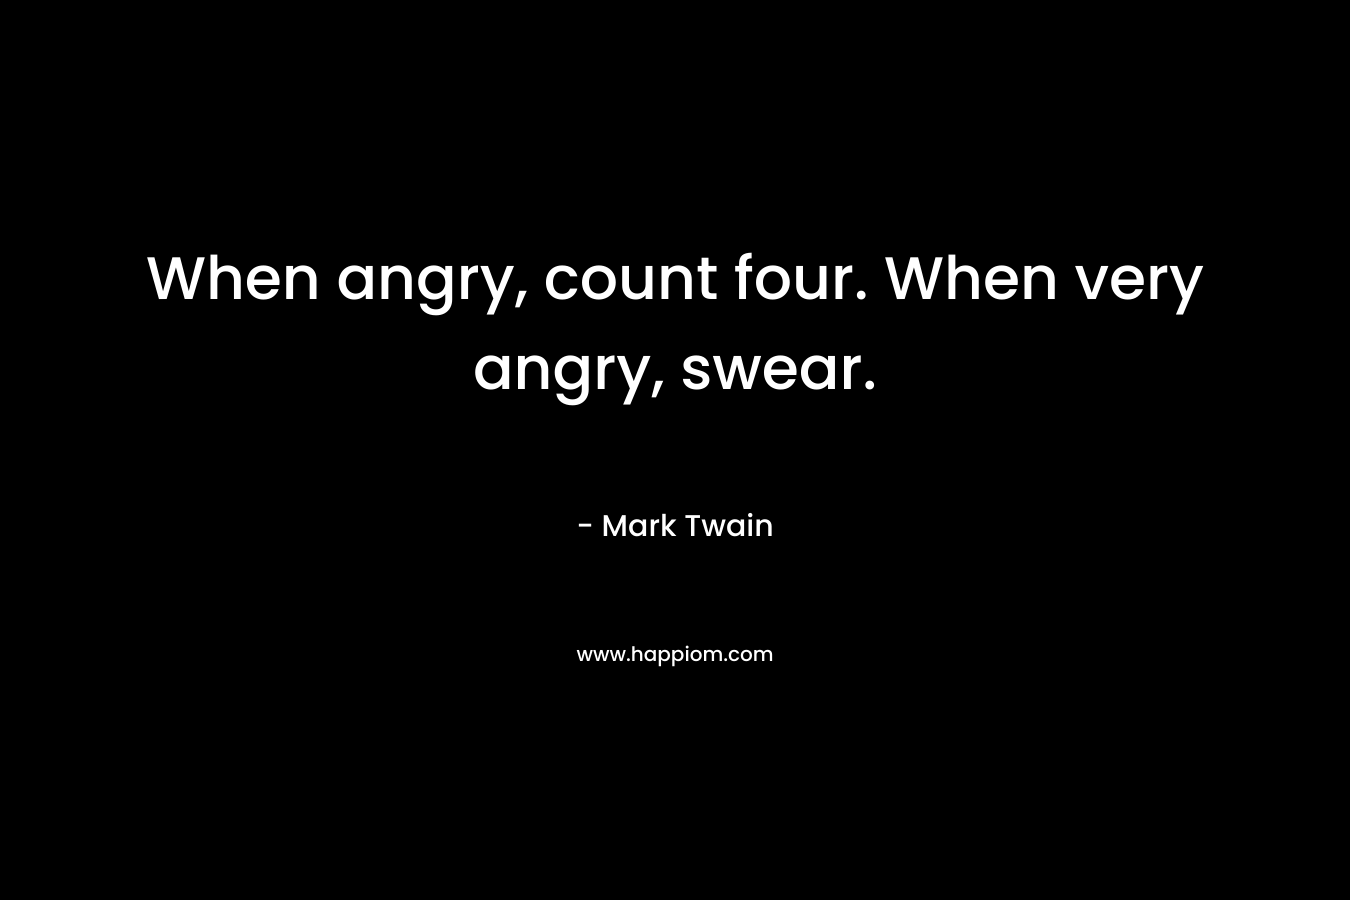 When angry, count four. When very angry, swear. – Mark Twain